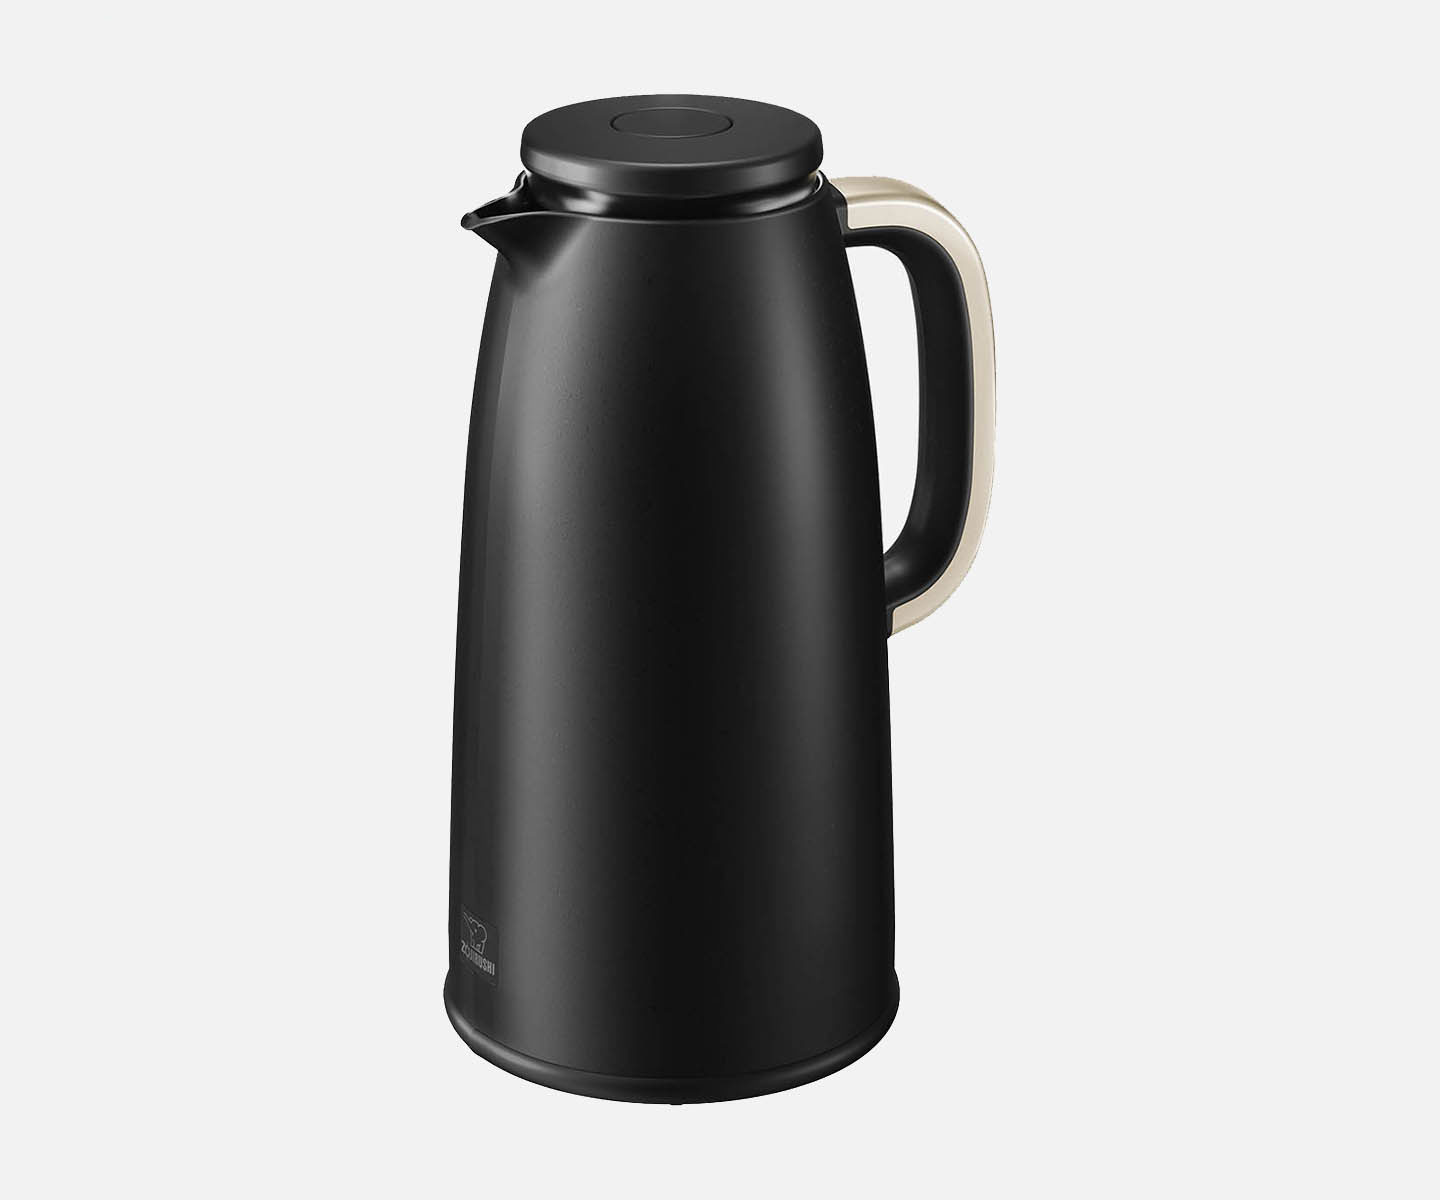 Carafe in black with a sleek and modern look